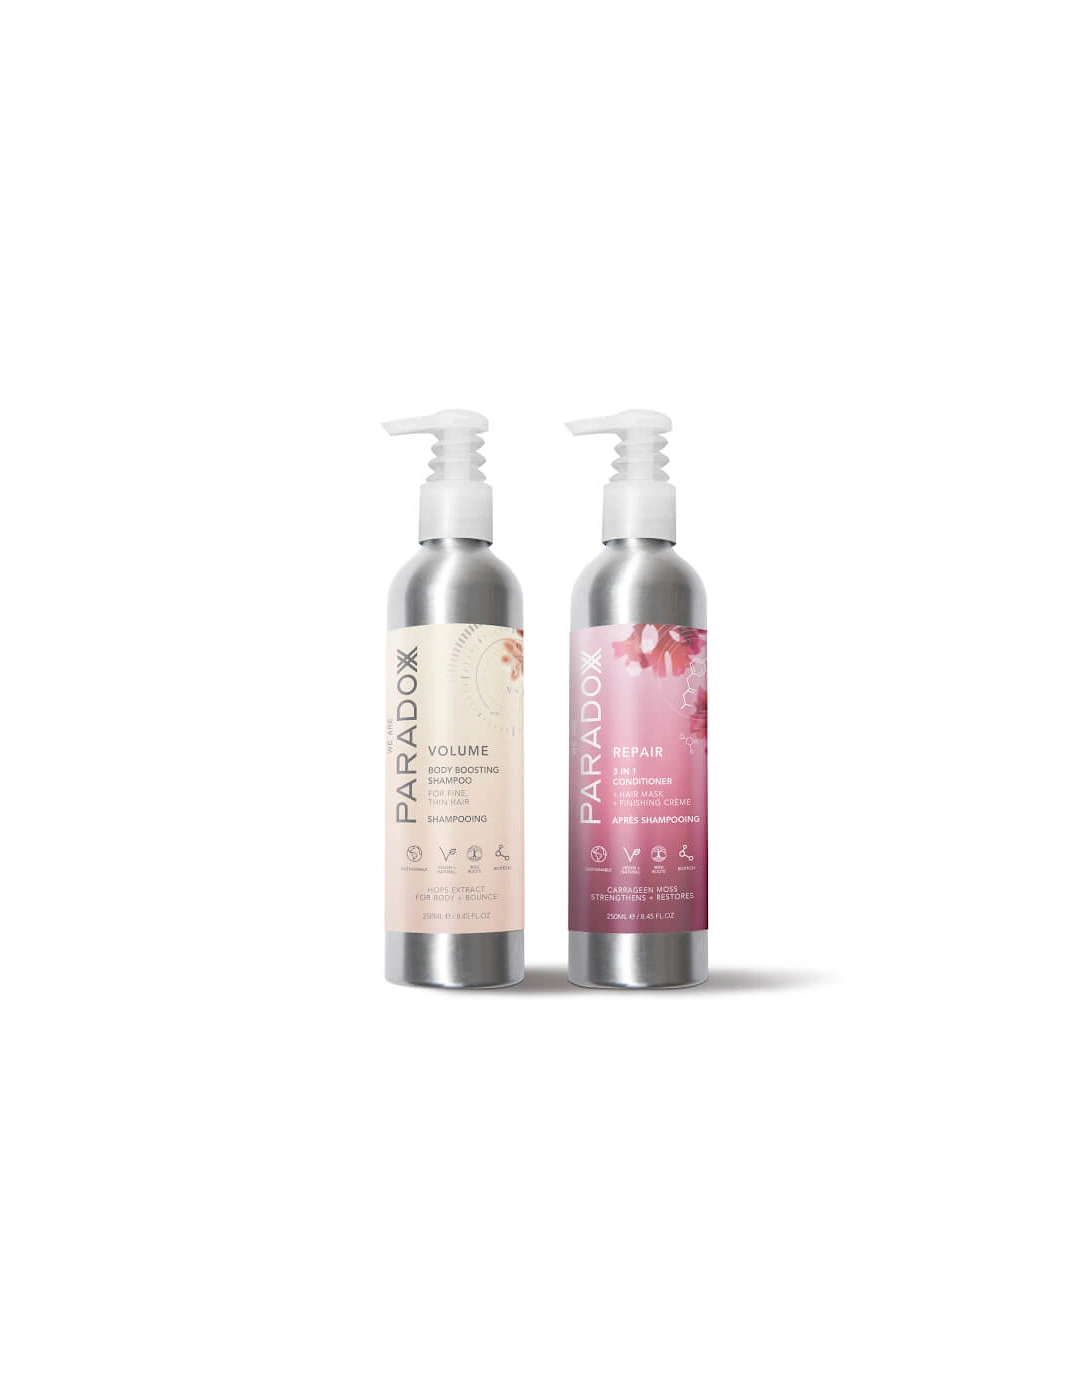 Volume Shampoo and Repair 3-in-1 Conditioner - We Are Paradoxx, 2 of 1